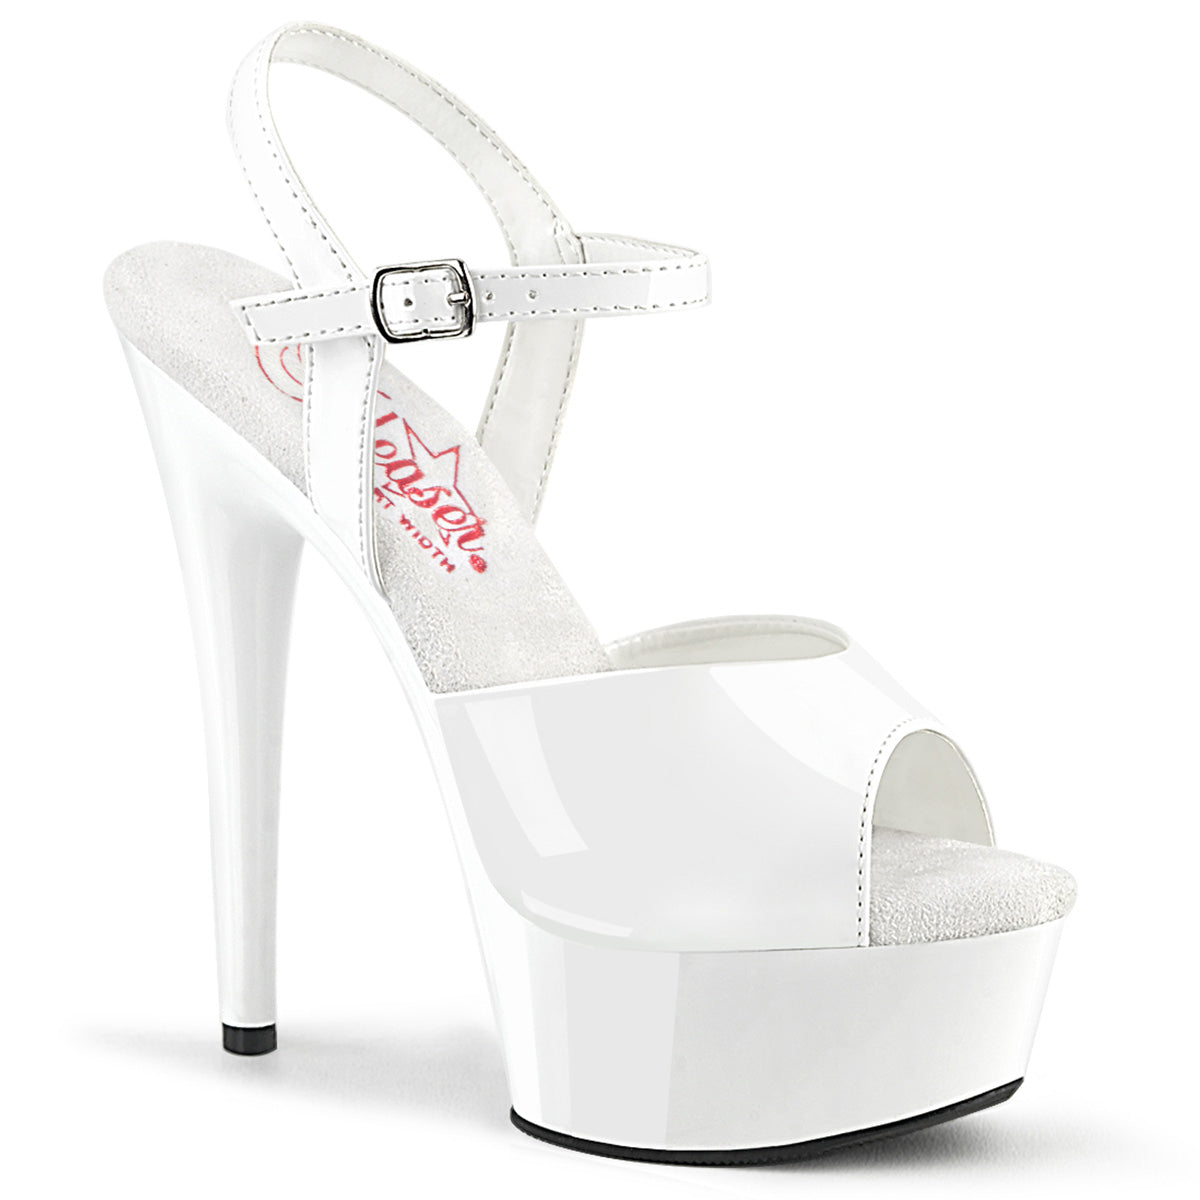 Ivory Bridal Mules with Crystal Strap Detail | Bella Belle